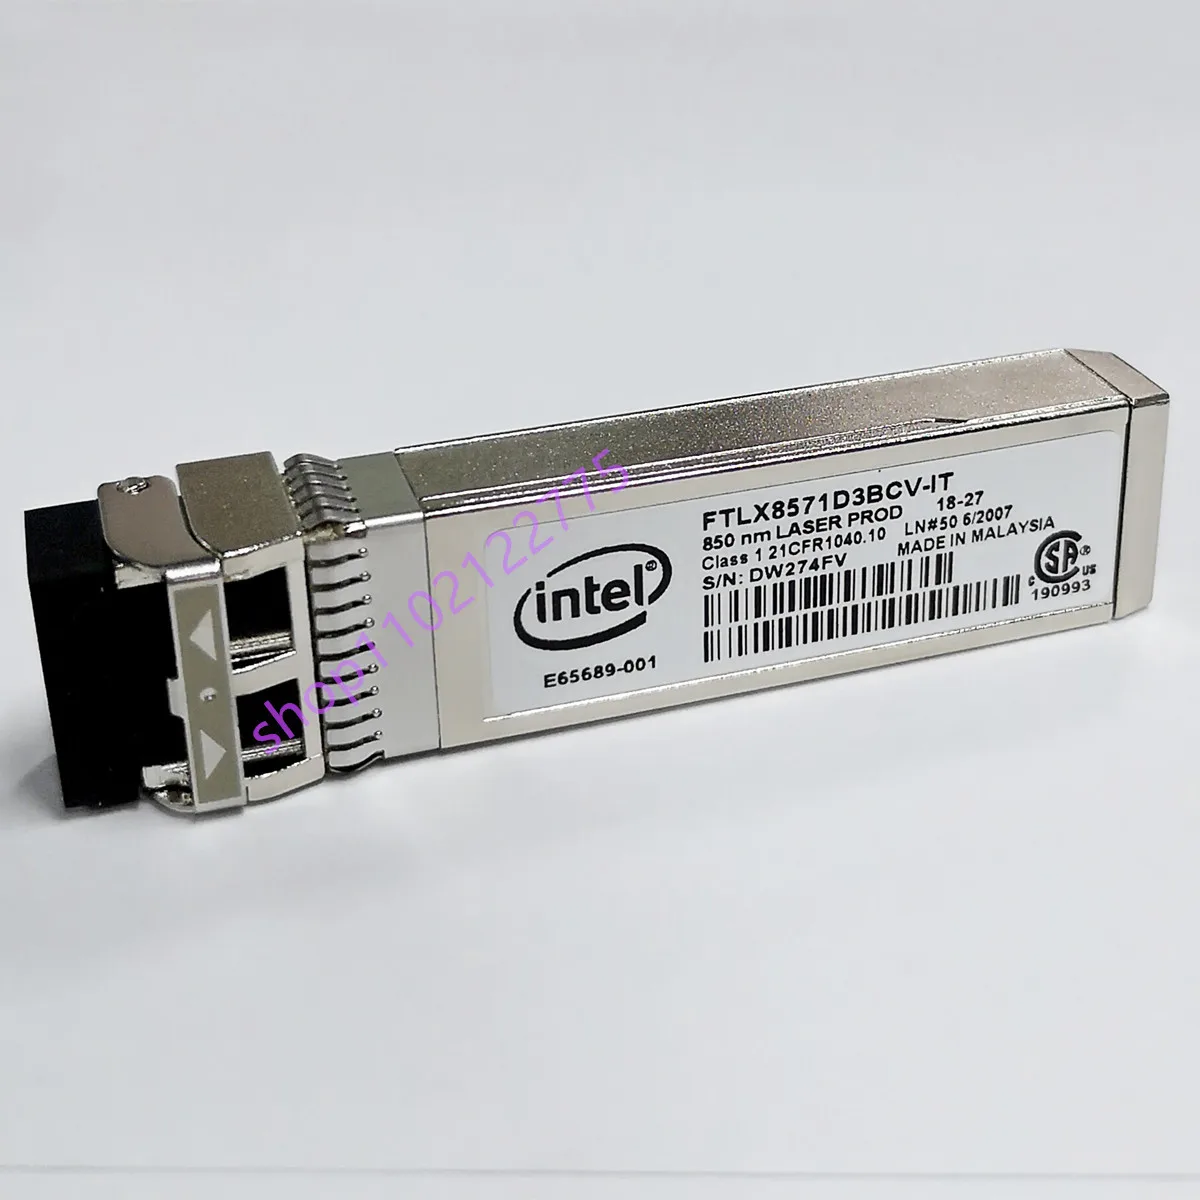 In-tel Transceiver 10g Sfp/FTLX8571D3BCV-IT/E65689-001/For X710 X520 Network Adapter Switch/Sfp 10gb Switch Optical Fiber Module